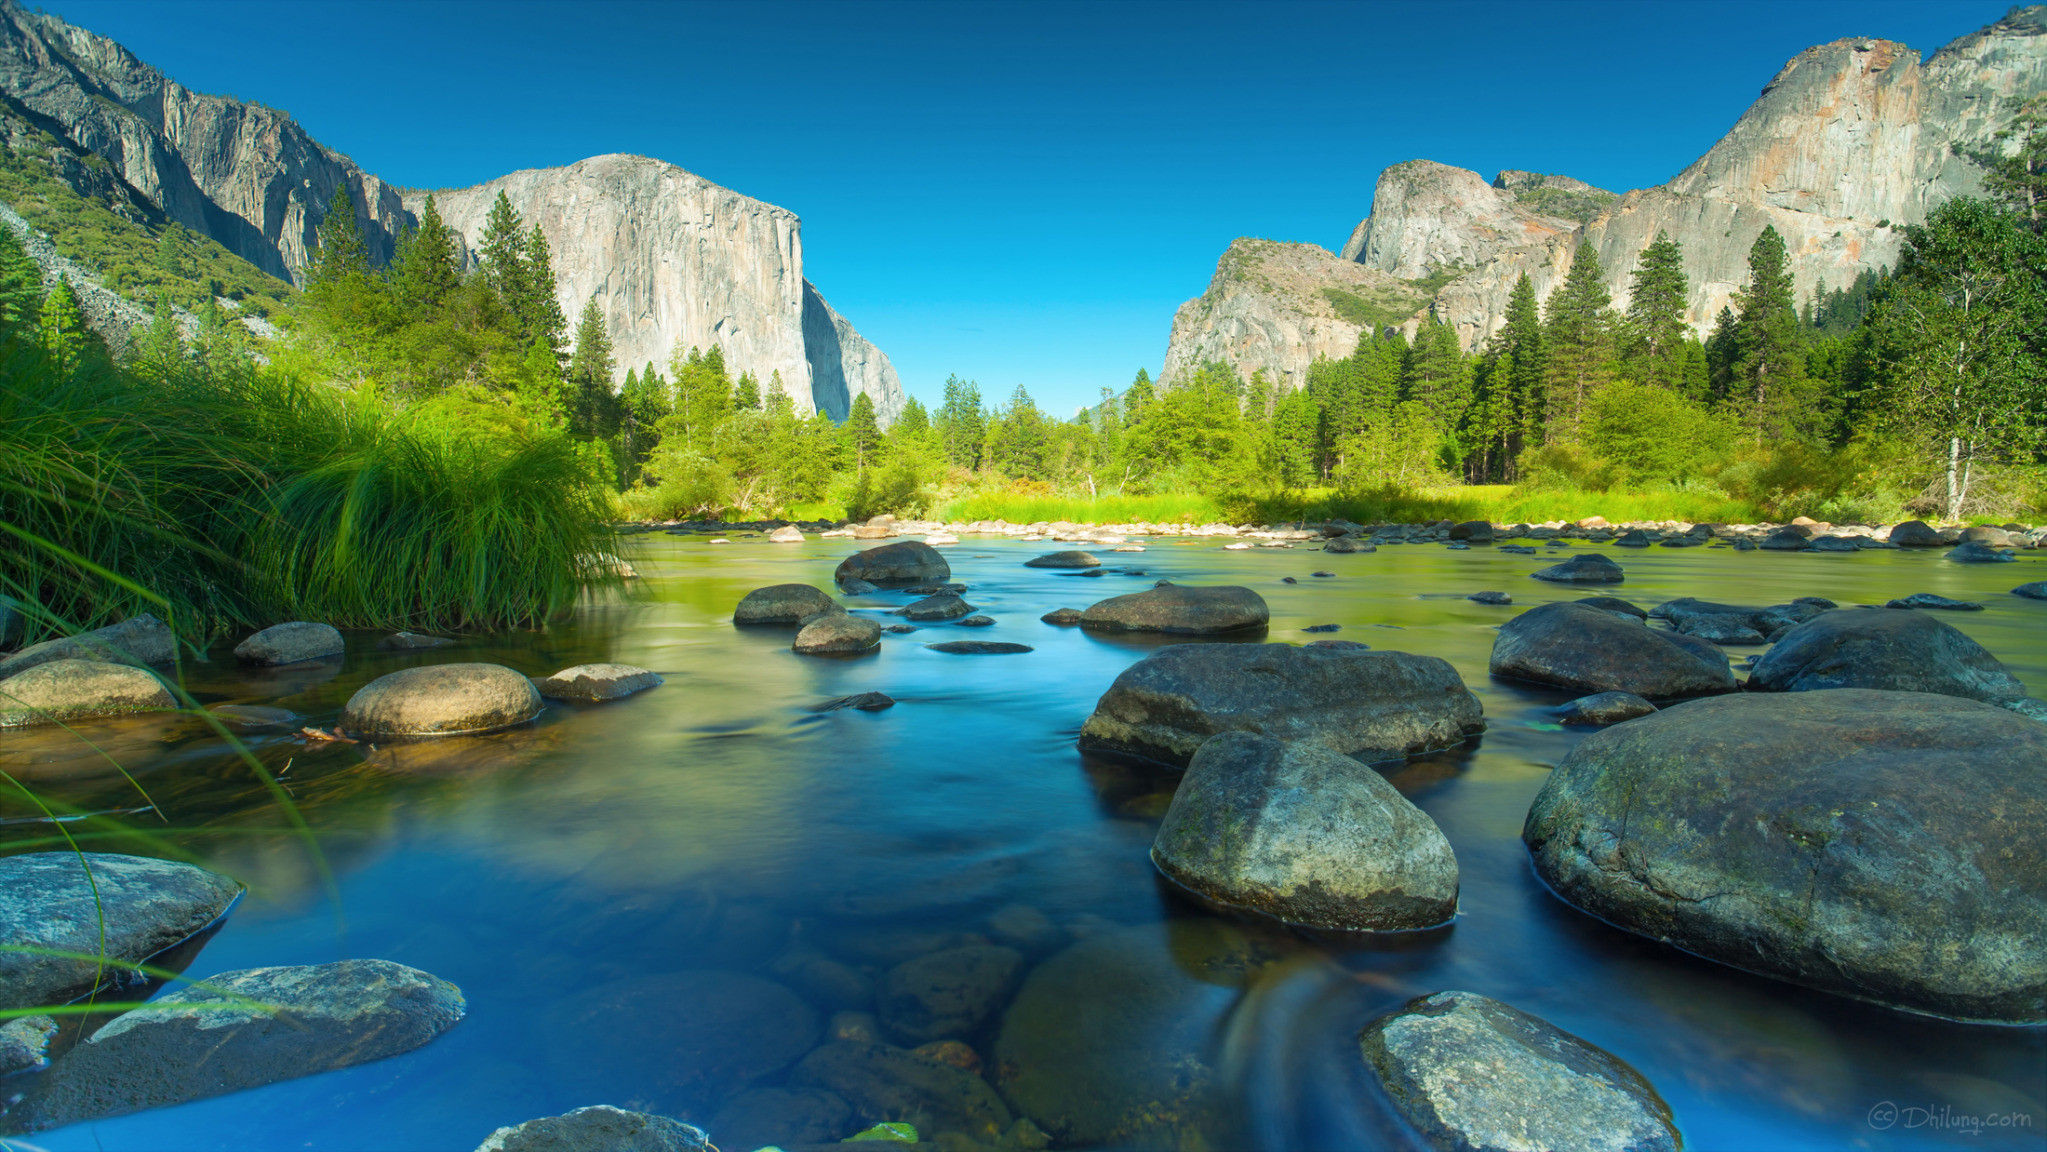 2047x1152 Yosemite National Park Wallpaper - HD Wallpapers Backgrounds of Your .